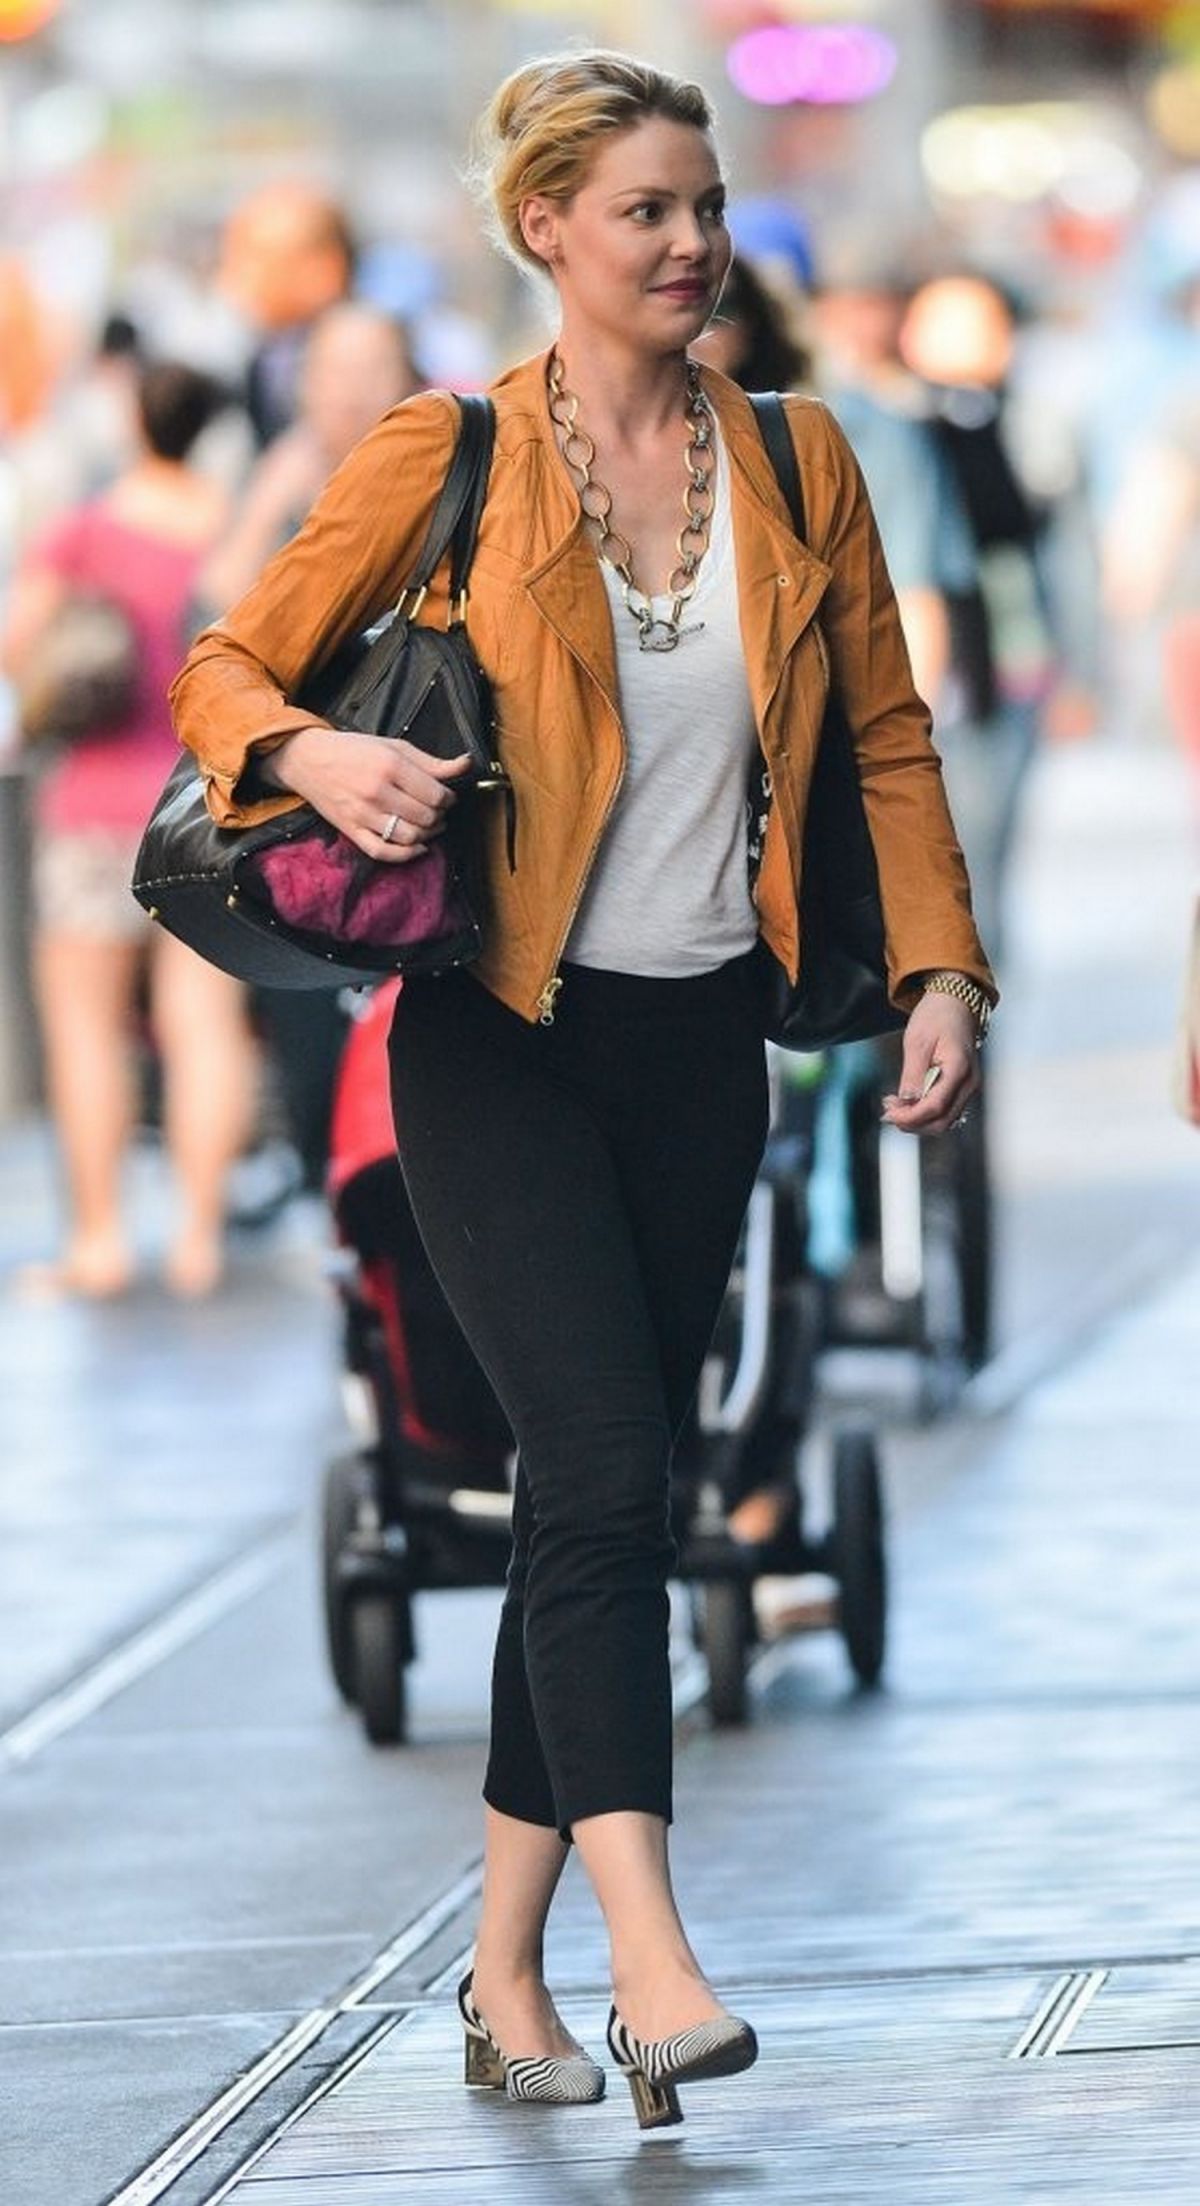 katherine-heigl-out-in-new-york-city_3.jpg